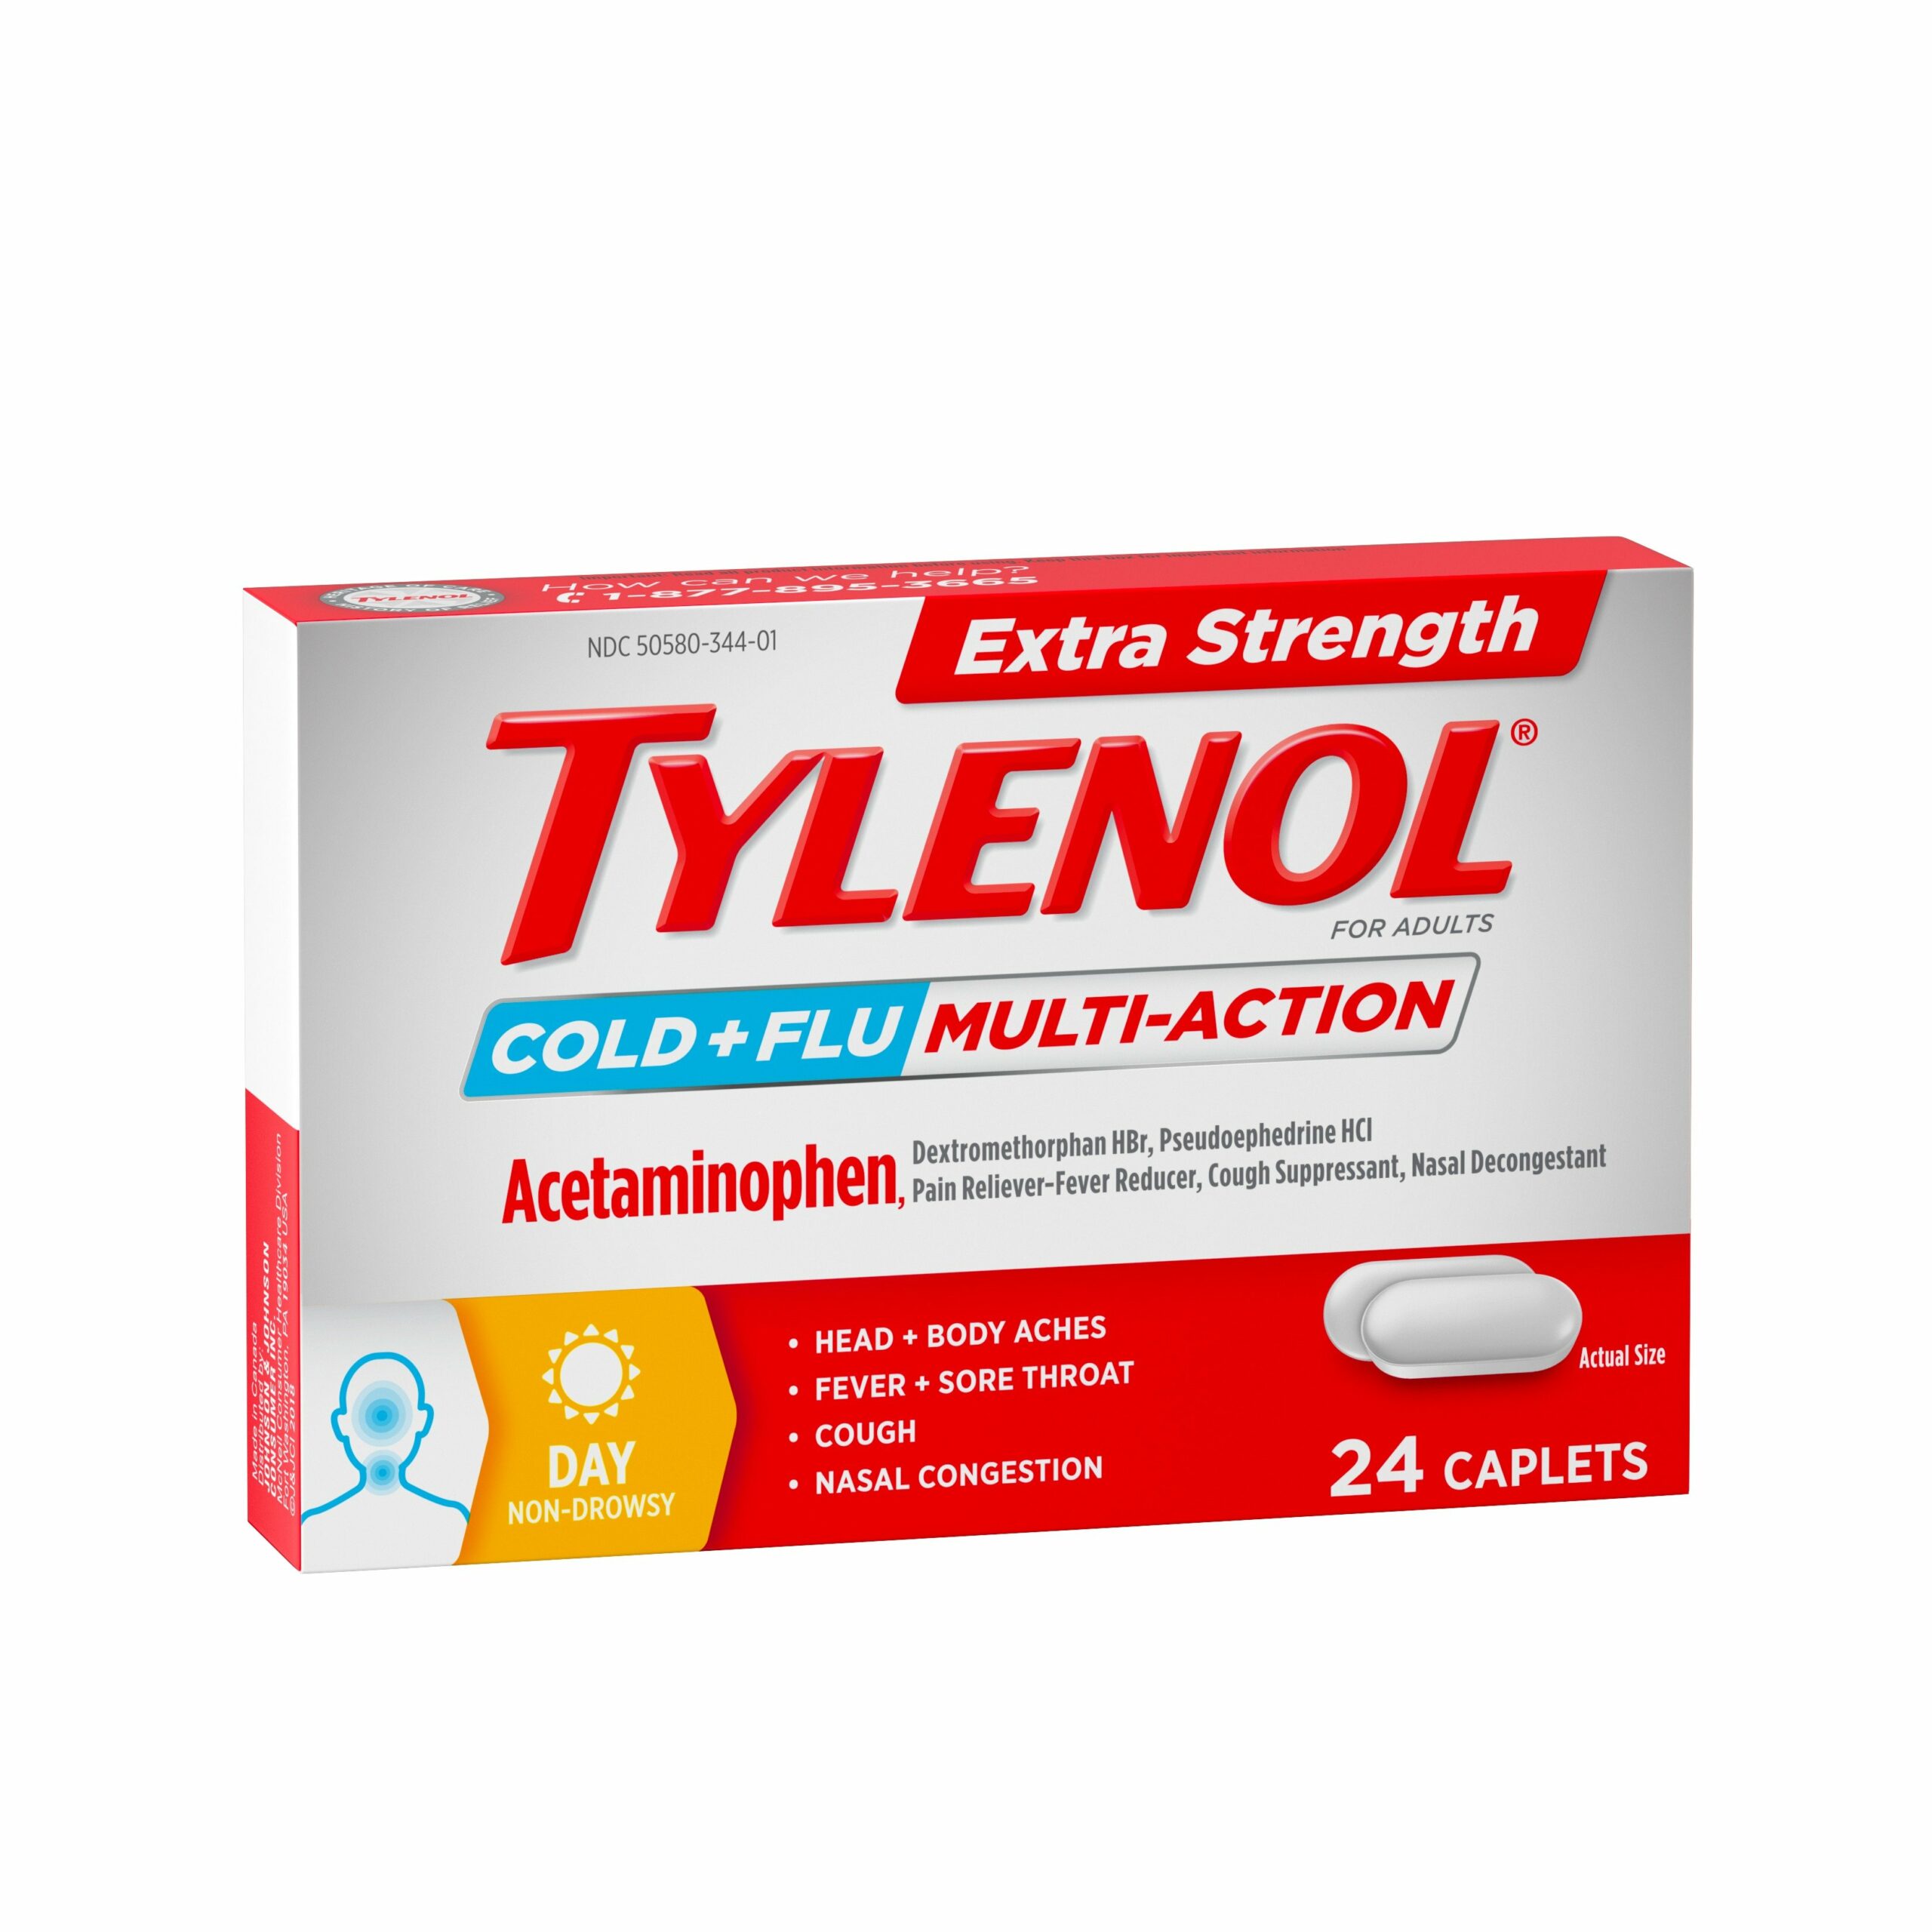 Finding The Right Frequency: Taking Tylenol Extra Strength For Maximum Effectiveness